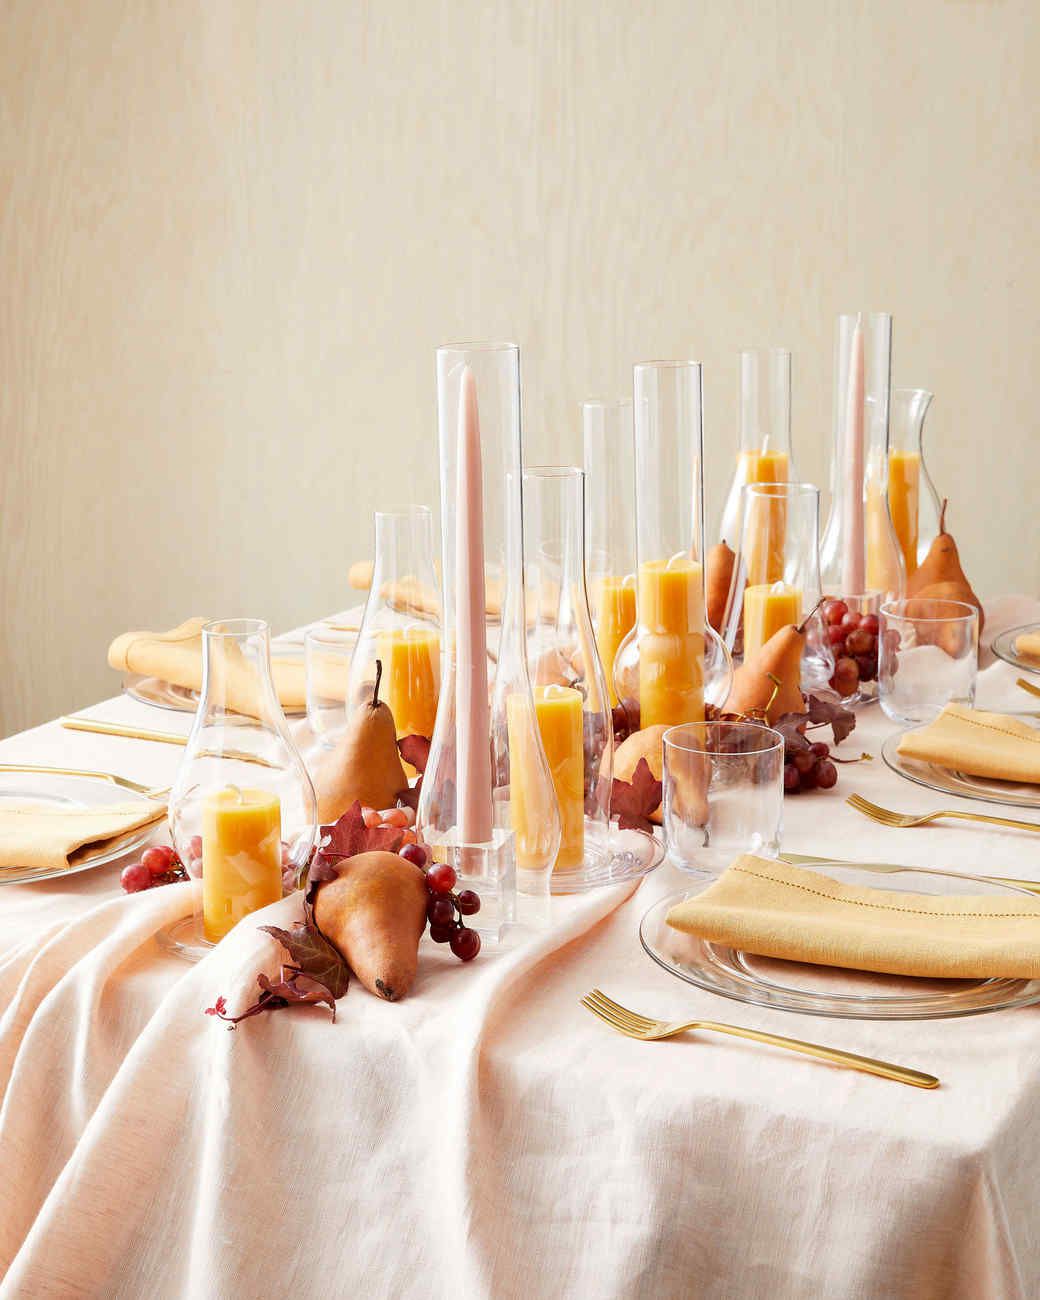 table decorated with candles in glass lamp chimneys and fruit